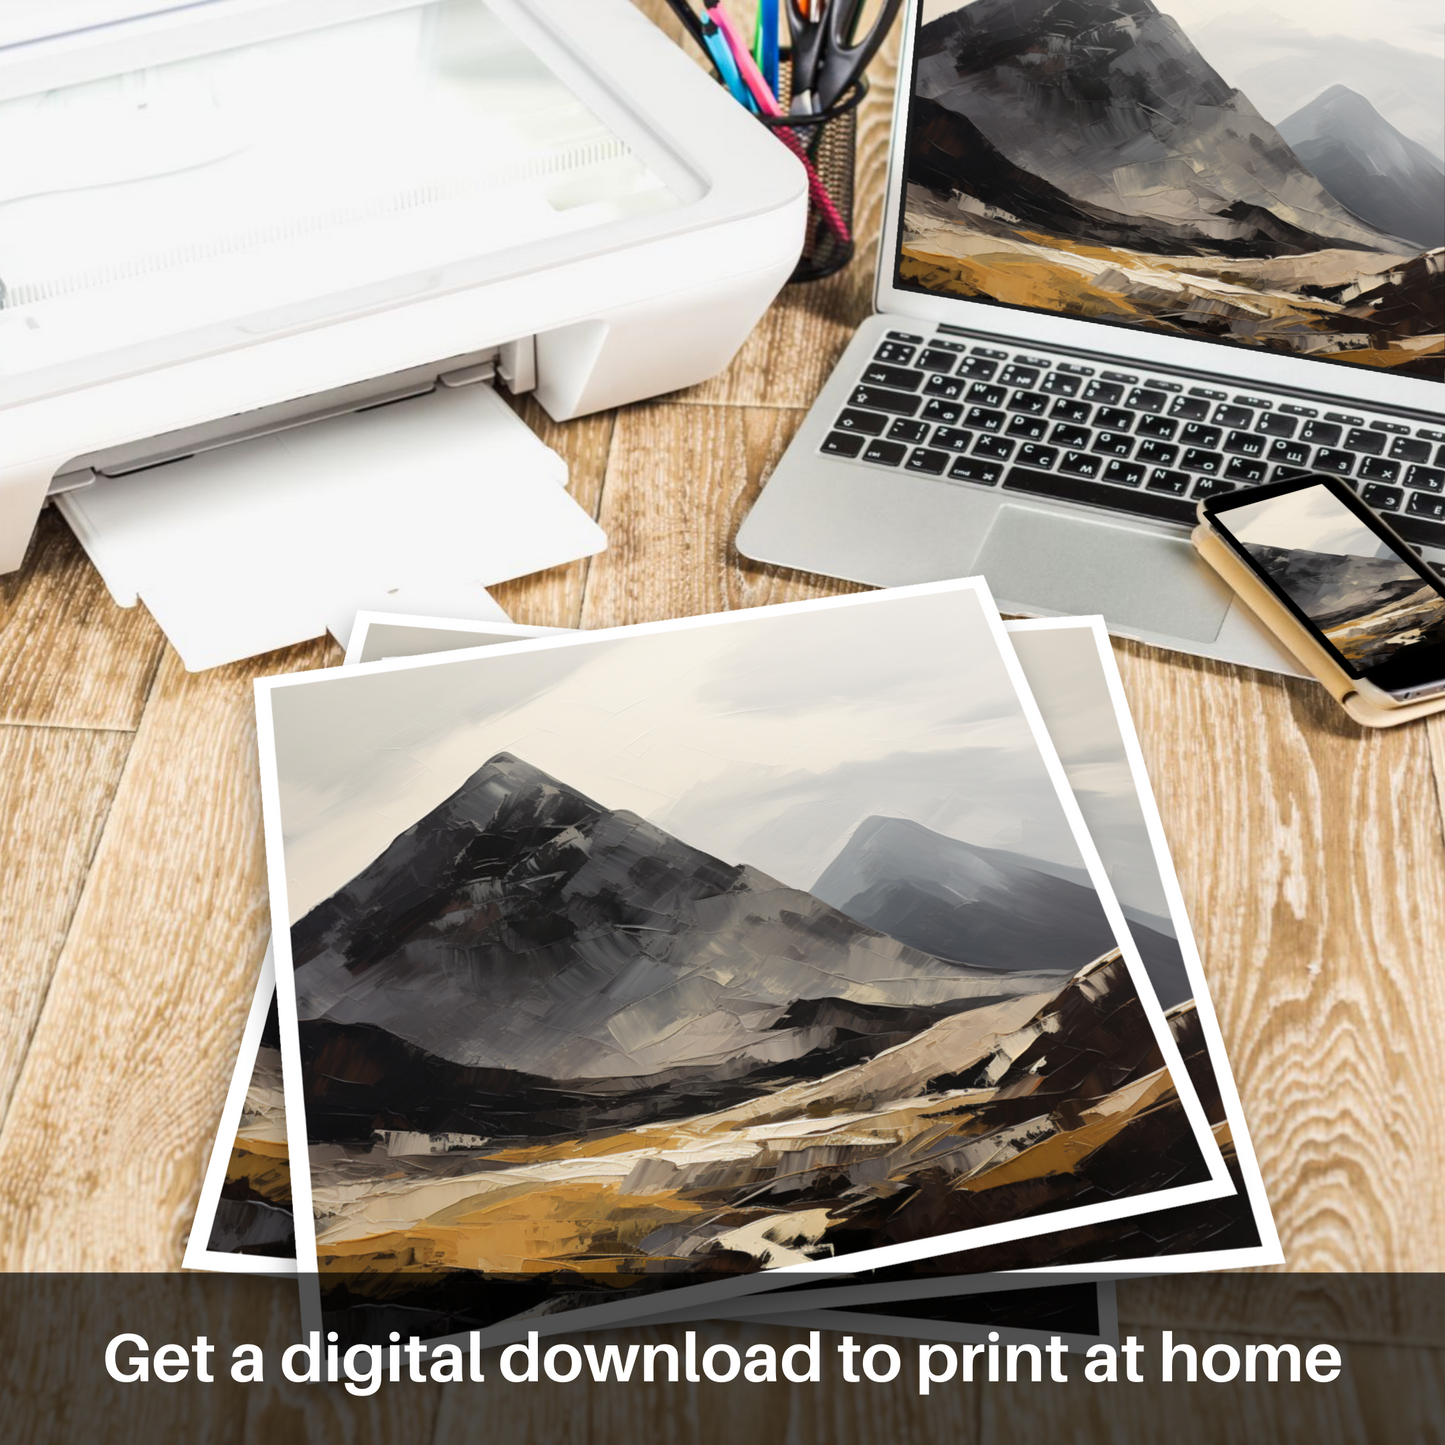 Downloadable and printable picture of Beinn Ìme